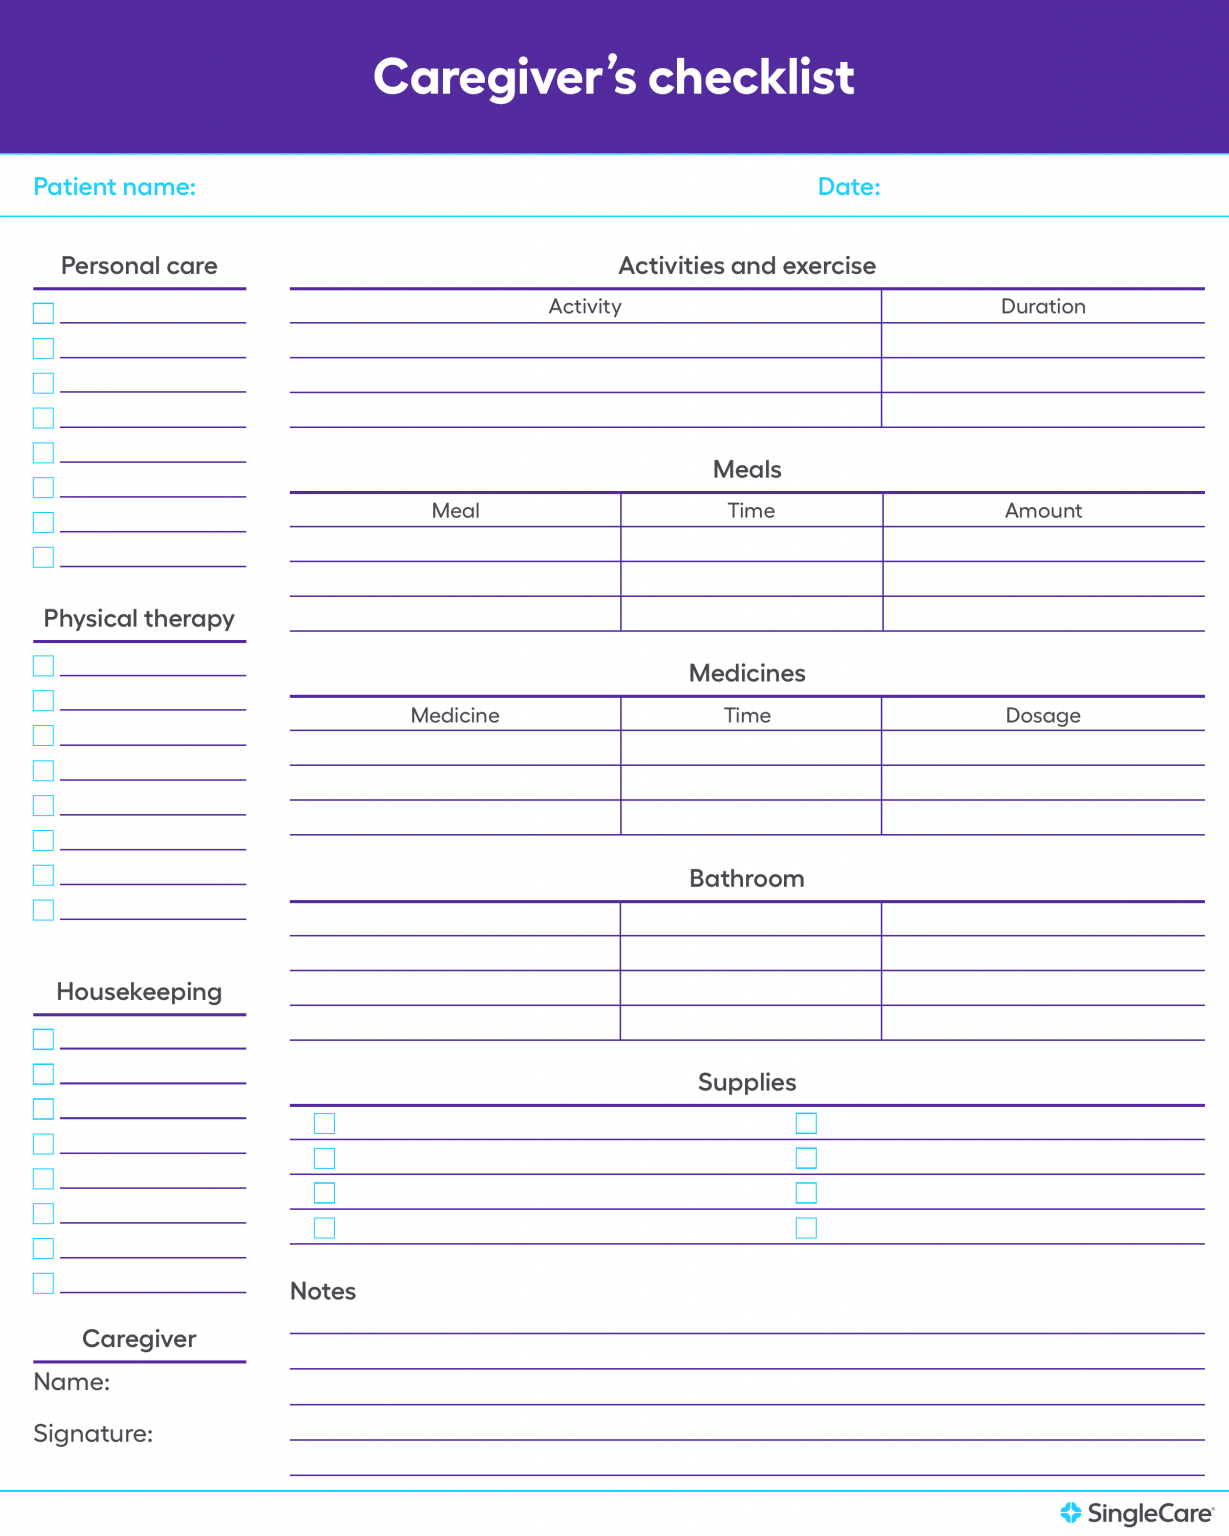 free-medication-list-templates-for-patients-and-caregivers